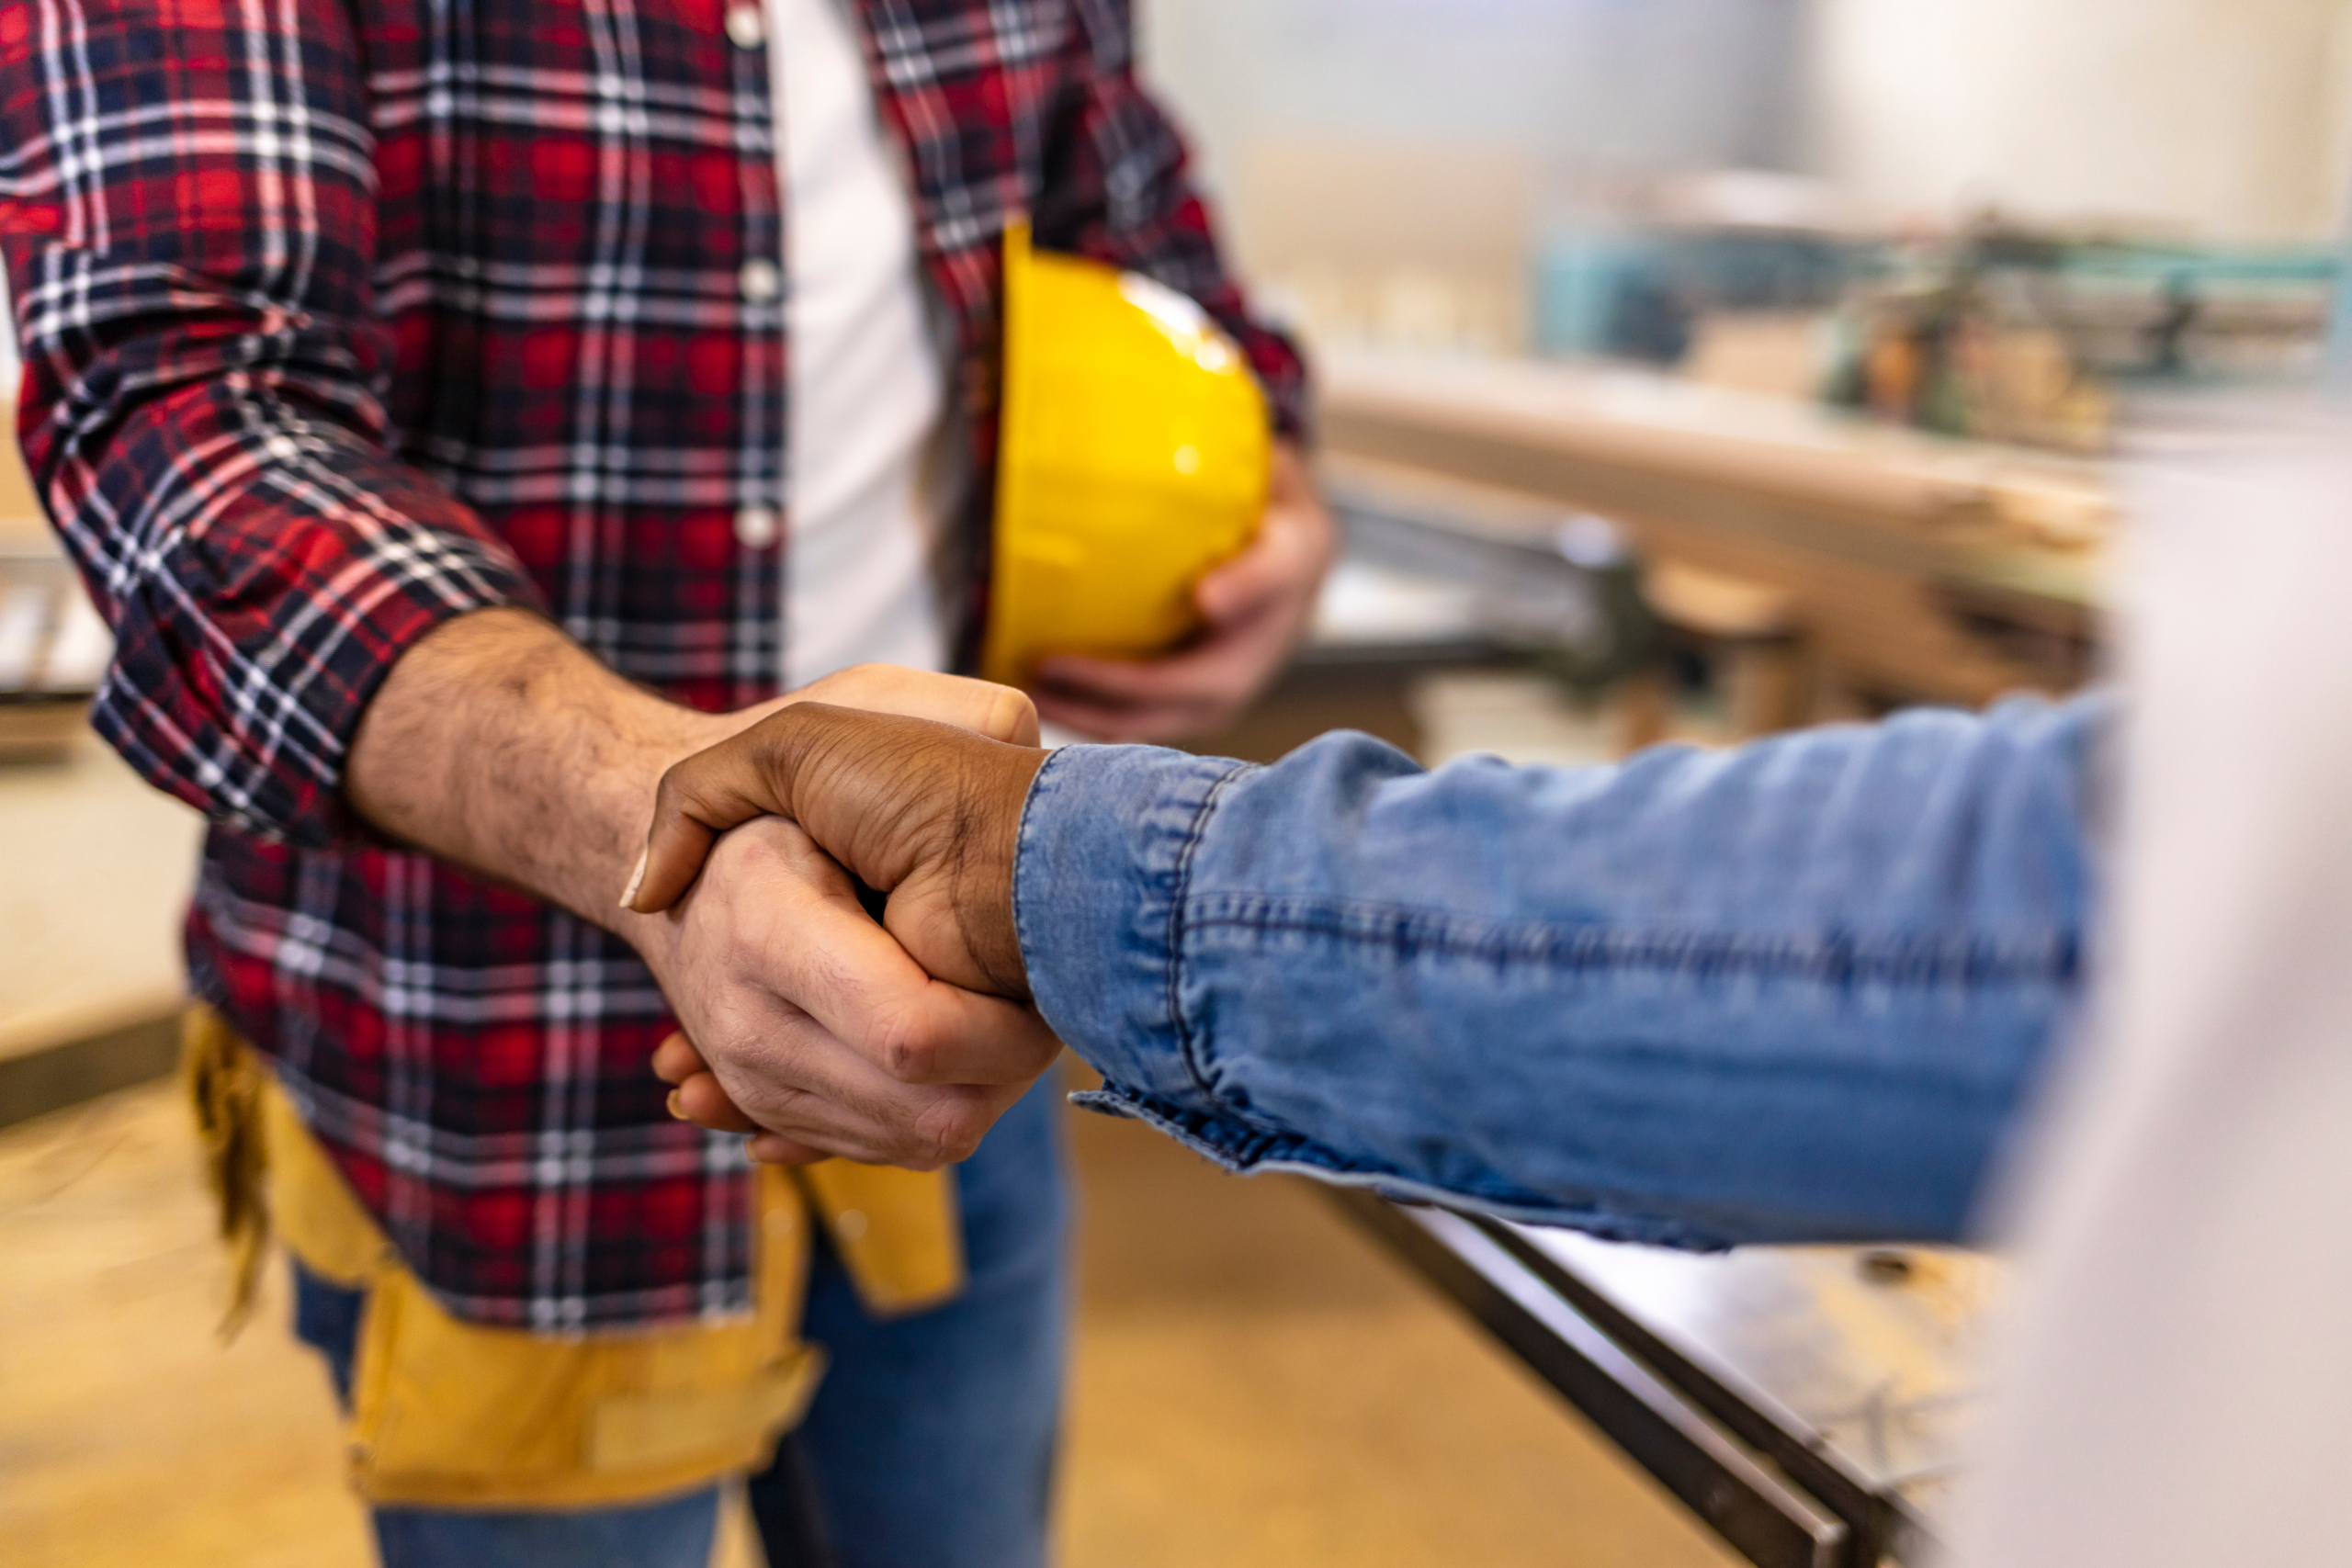 Close-up of two people shaking hands in a workshop, one holding a yellow hard hat.